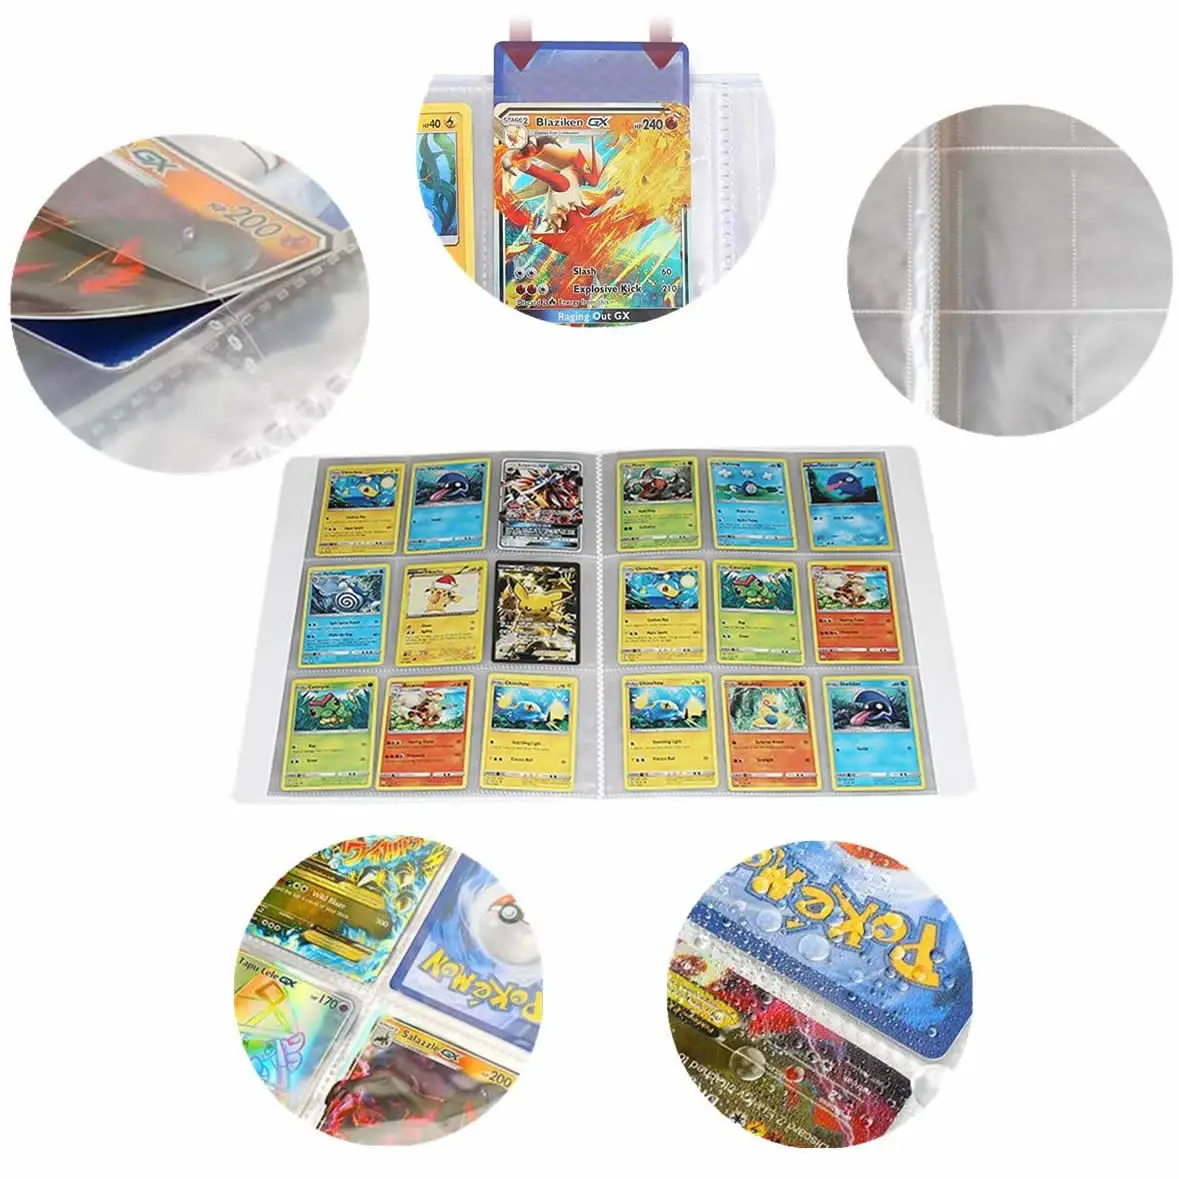 new 432pcs pokemon album characters card collection notebook game card playing album pokemones cards holder novelty gift for kid free global shipping